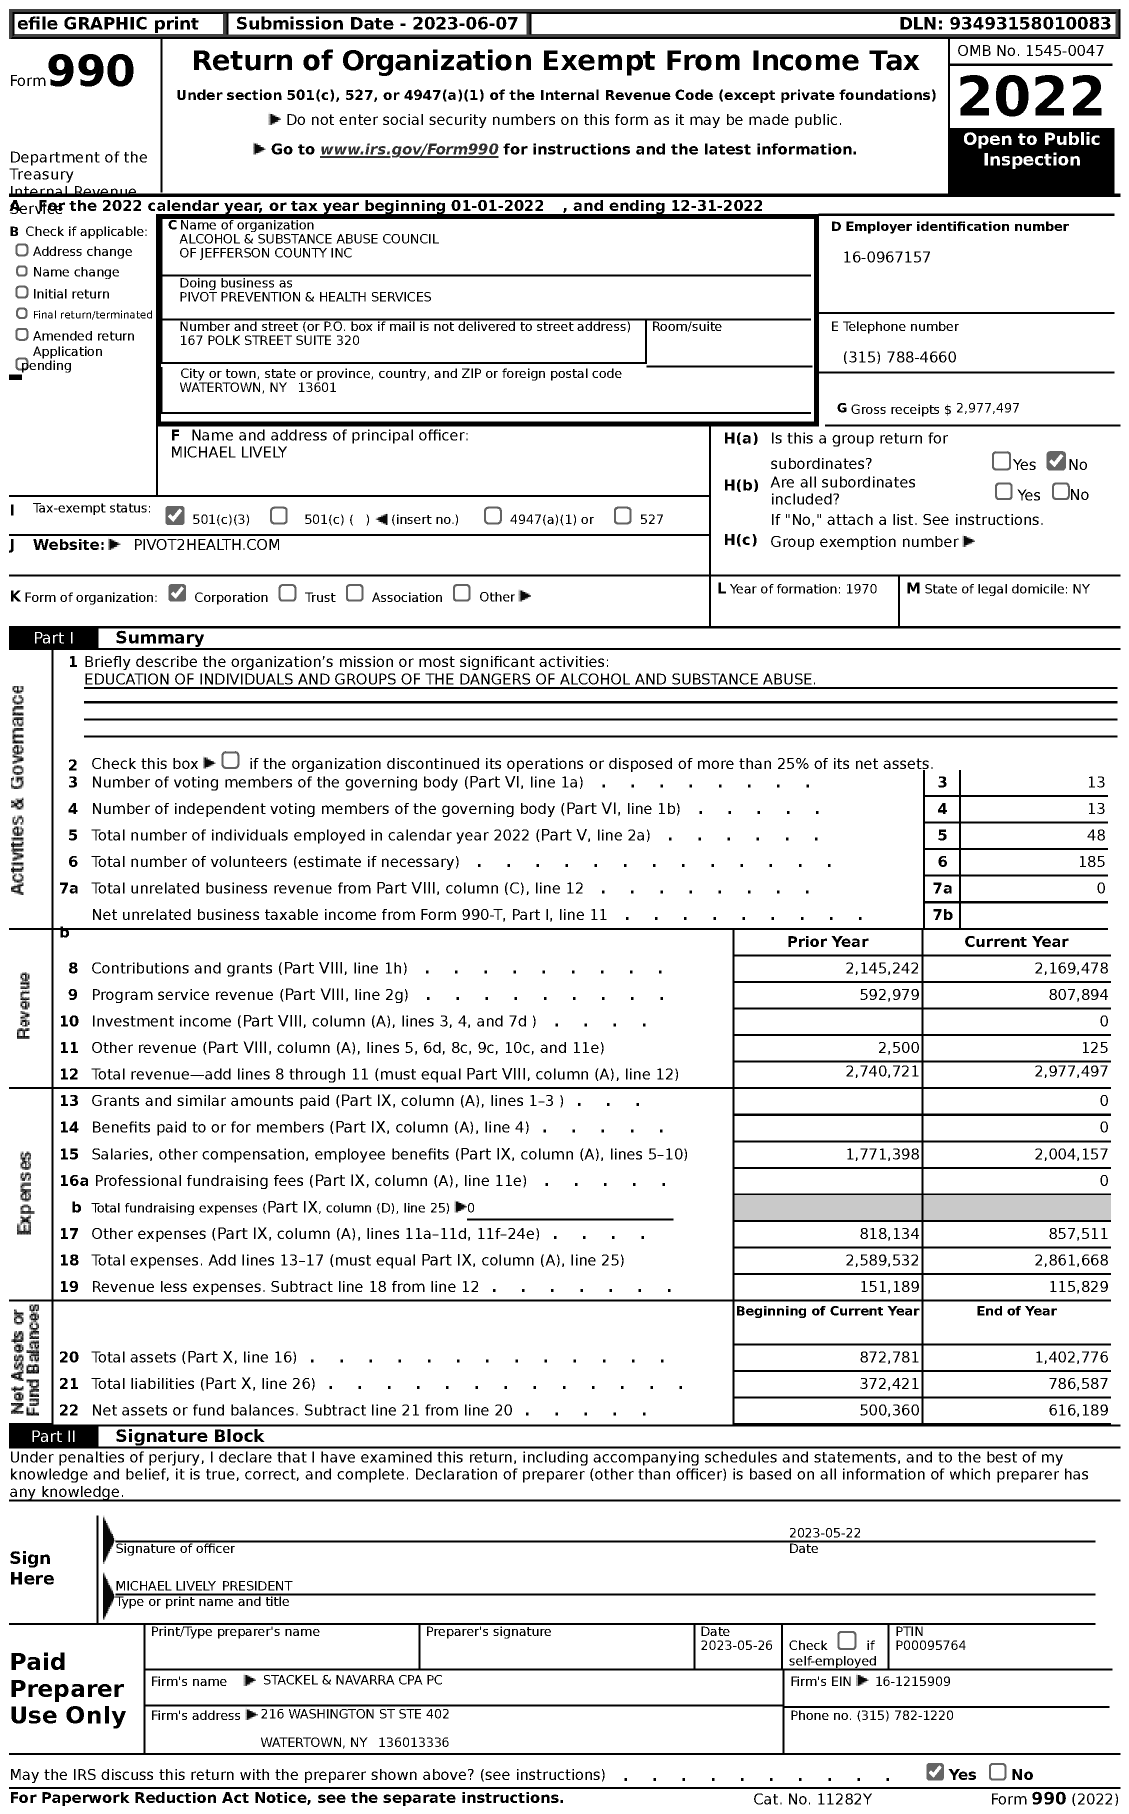 Image of first page of 2022 Form 990 for Pivot Prevention and Health Services